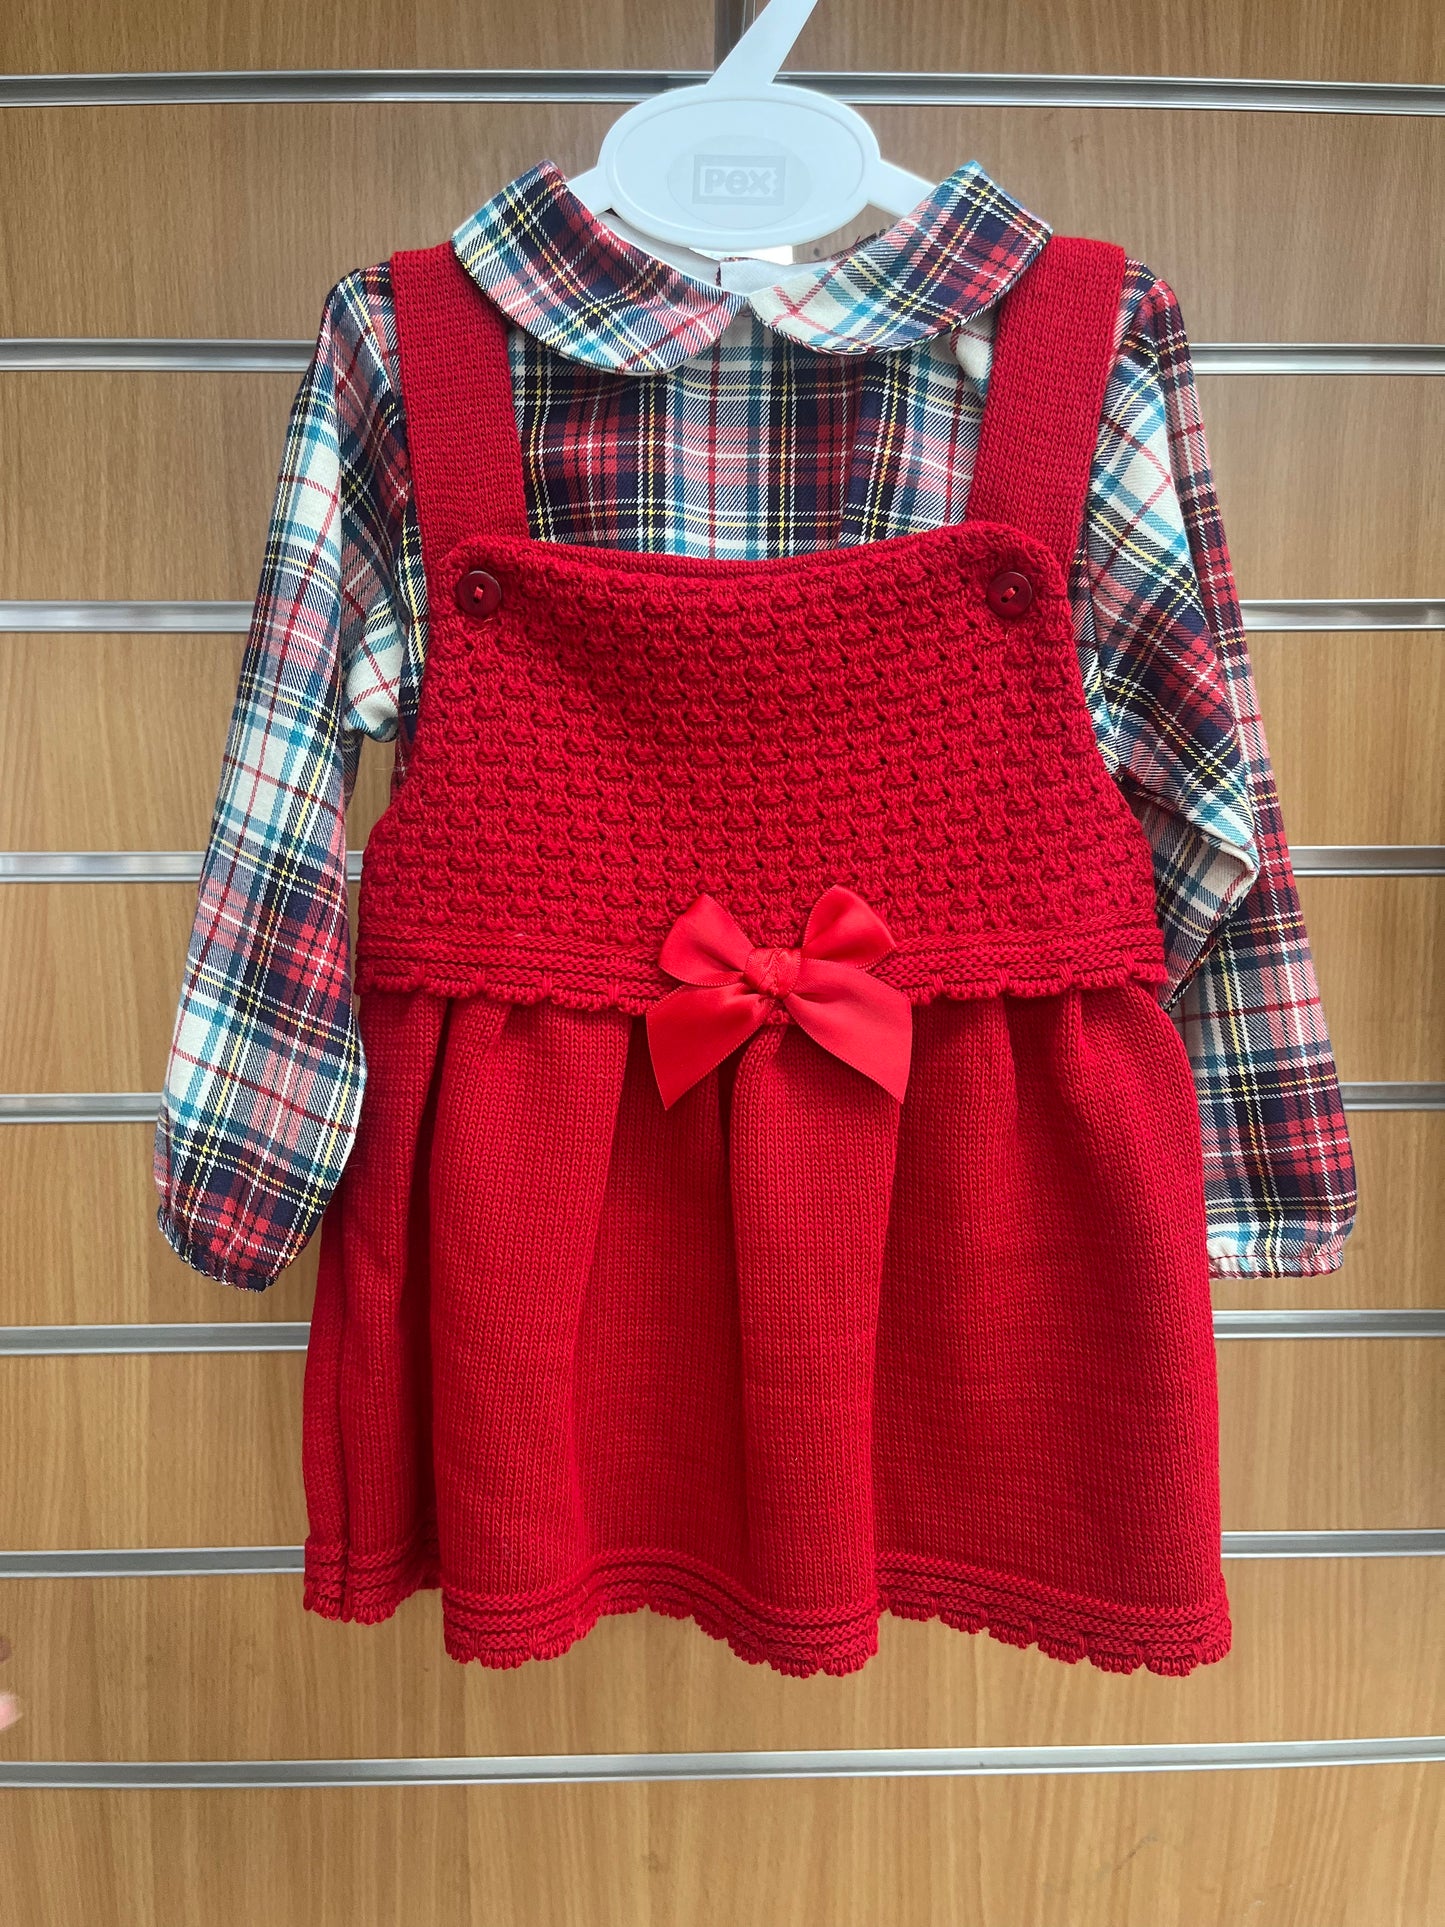 Red Knitted Dress with Cream and Red Tartan Shirt